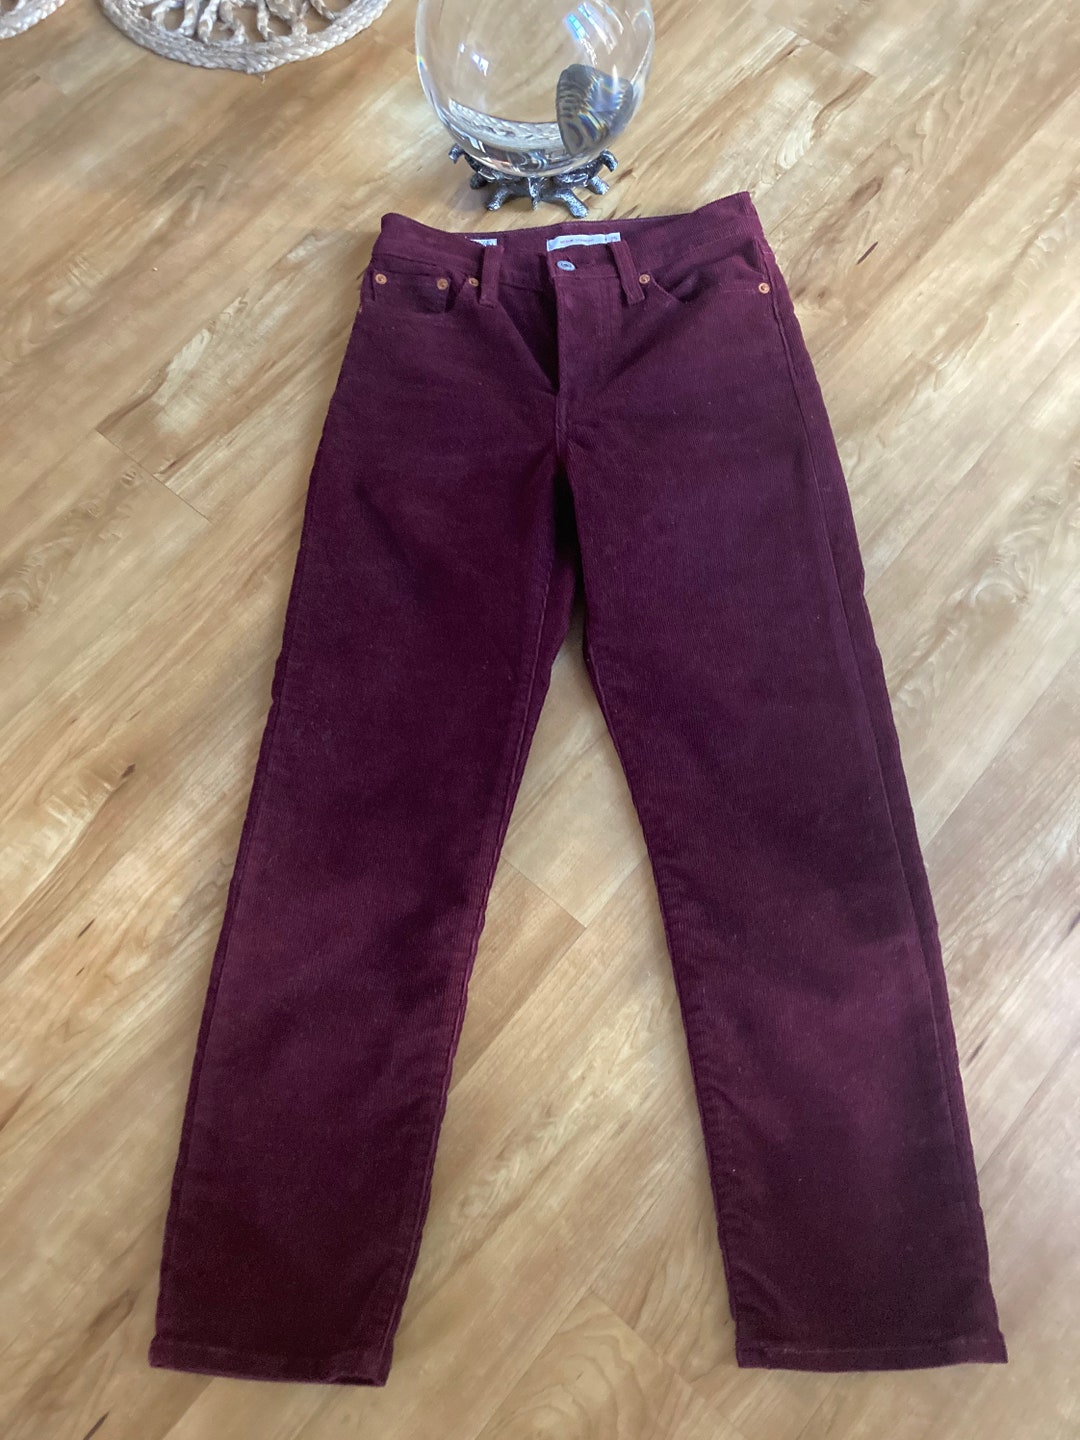 Levis Wedgie Straight Maroon Cords - Etsy